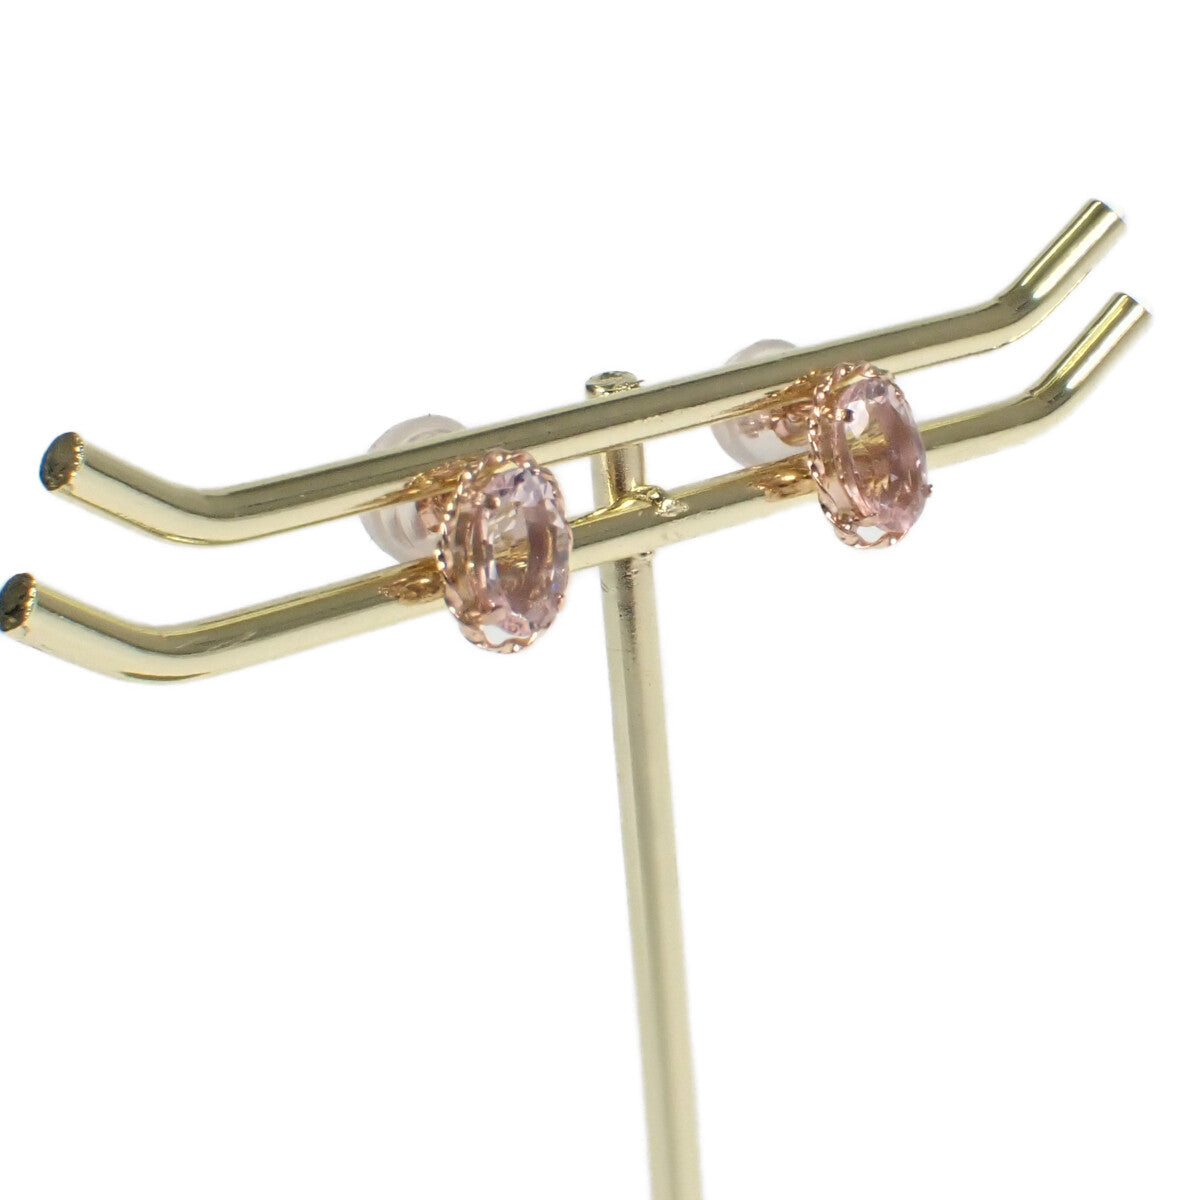 [LuxUness]  Women's 0.35ct Morganite Design Earrings in K18 Pink Gold, Gold, Never Used, Pre-owned in Brand new